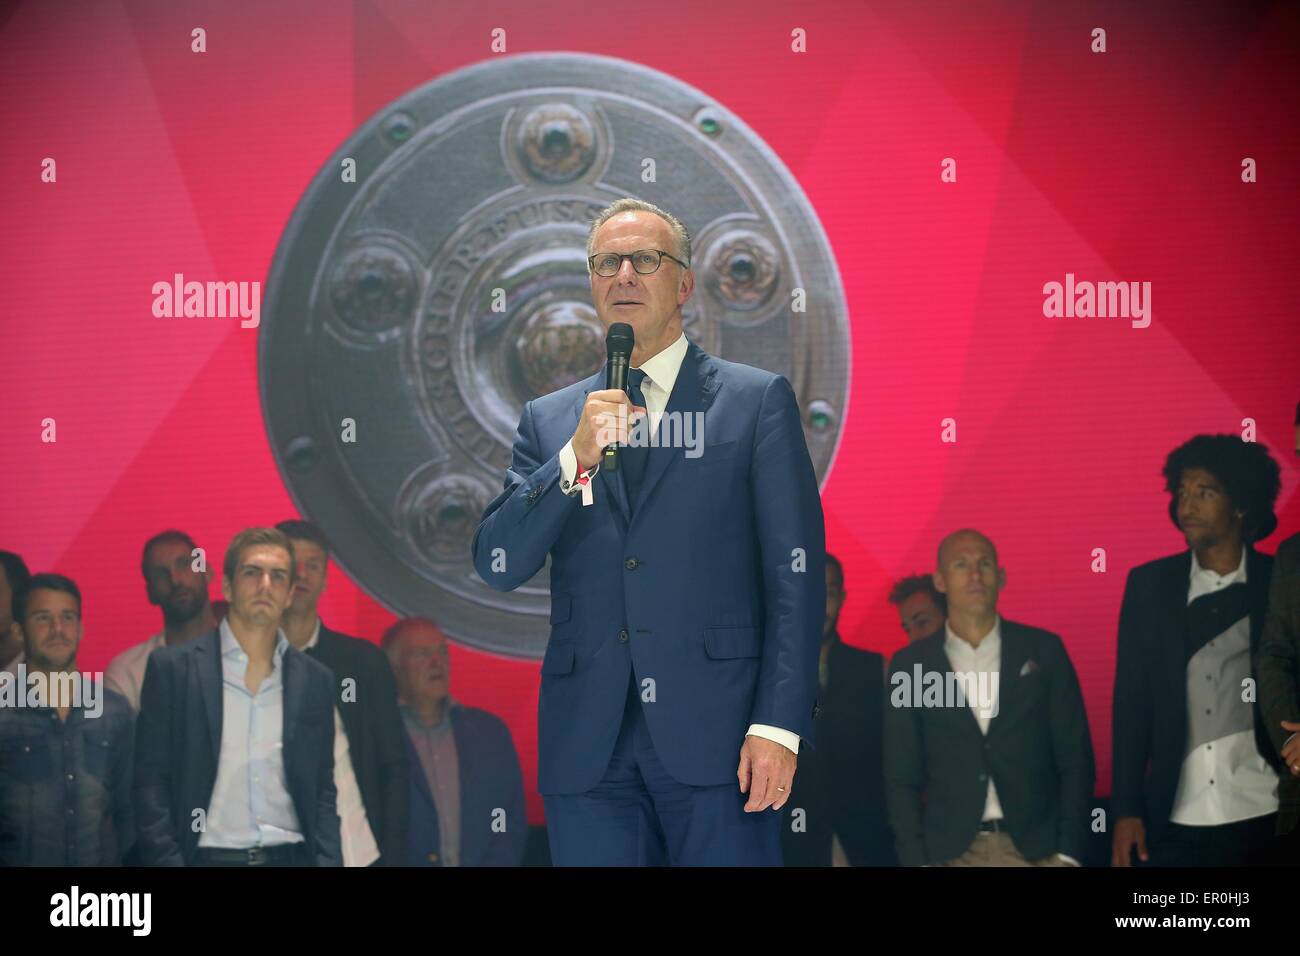 Munich, Germany. 23rd May, 2015. Karl-Heinz Rummenigge the CEO of Bayern Muenchen holds a speech during the FC Bayern Muenchen Champions dinner at Postpalast on May 23, 2015 in Munich, Germany. Photo by Lars Baron/Bongarts/Getty Images/FC Bayern/dpa (Editorial use only) Credit:  dpa/Alamy Live News Stock Photo